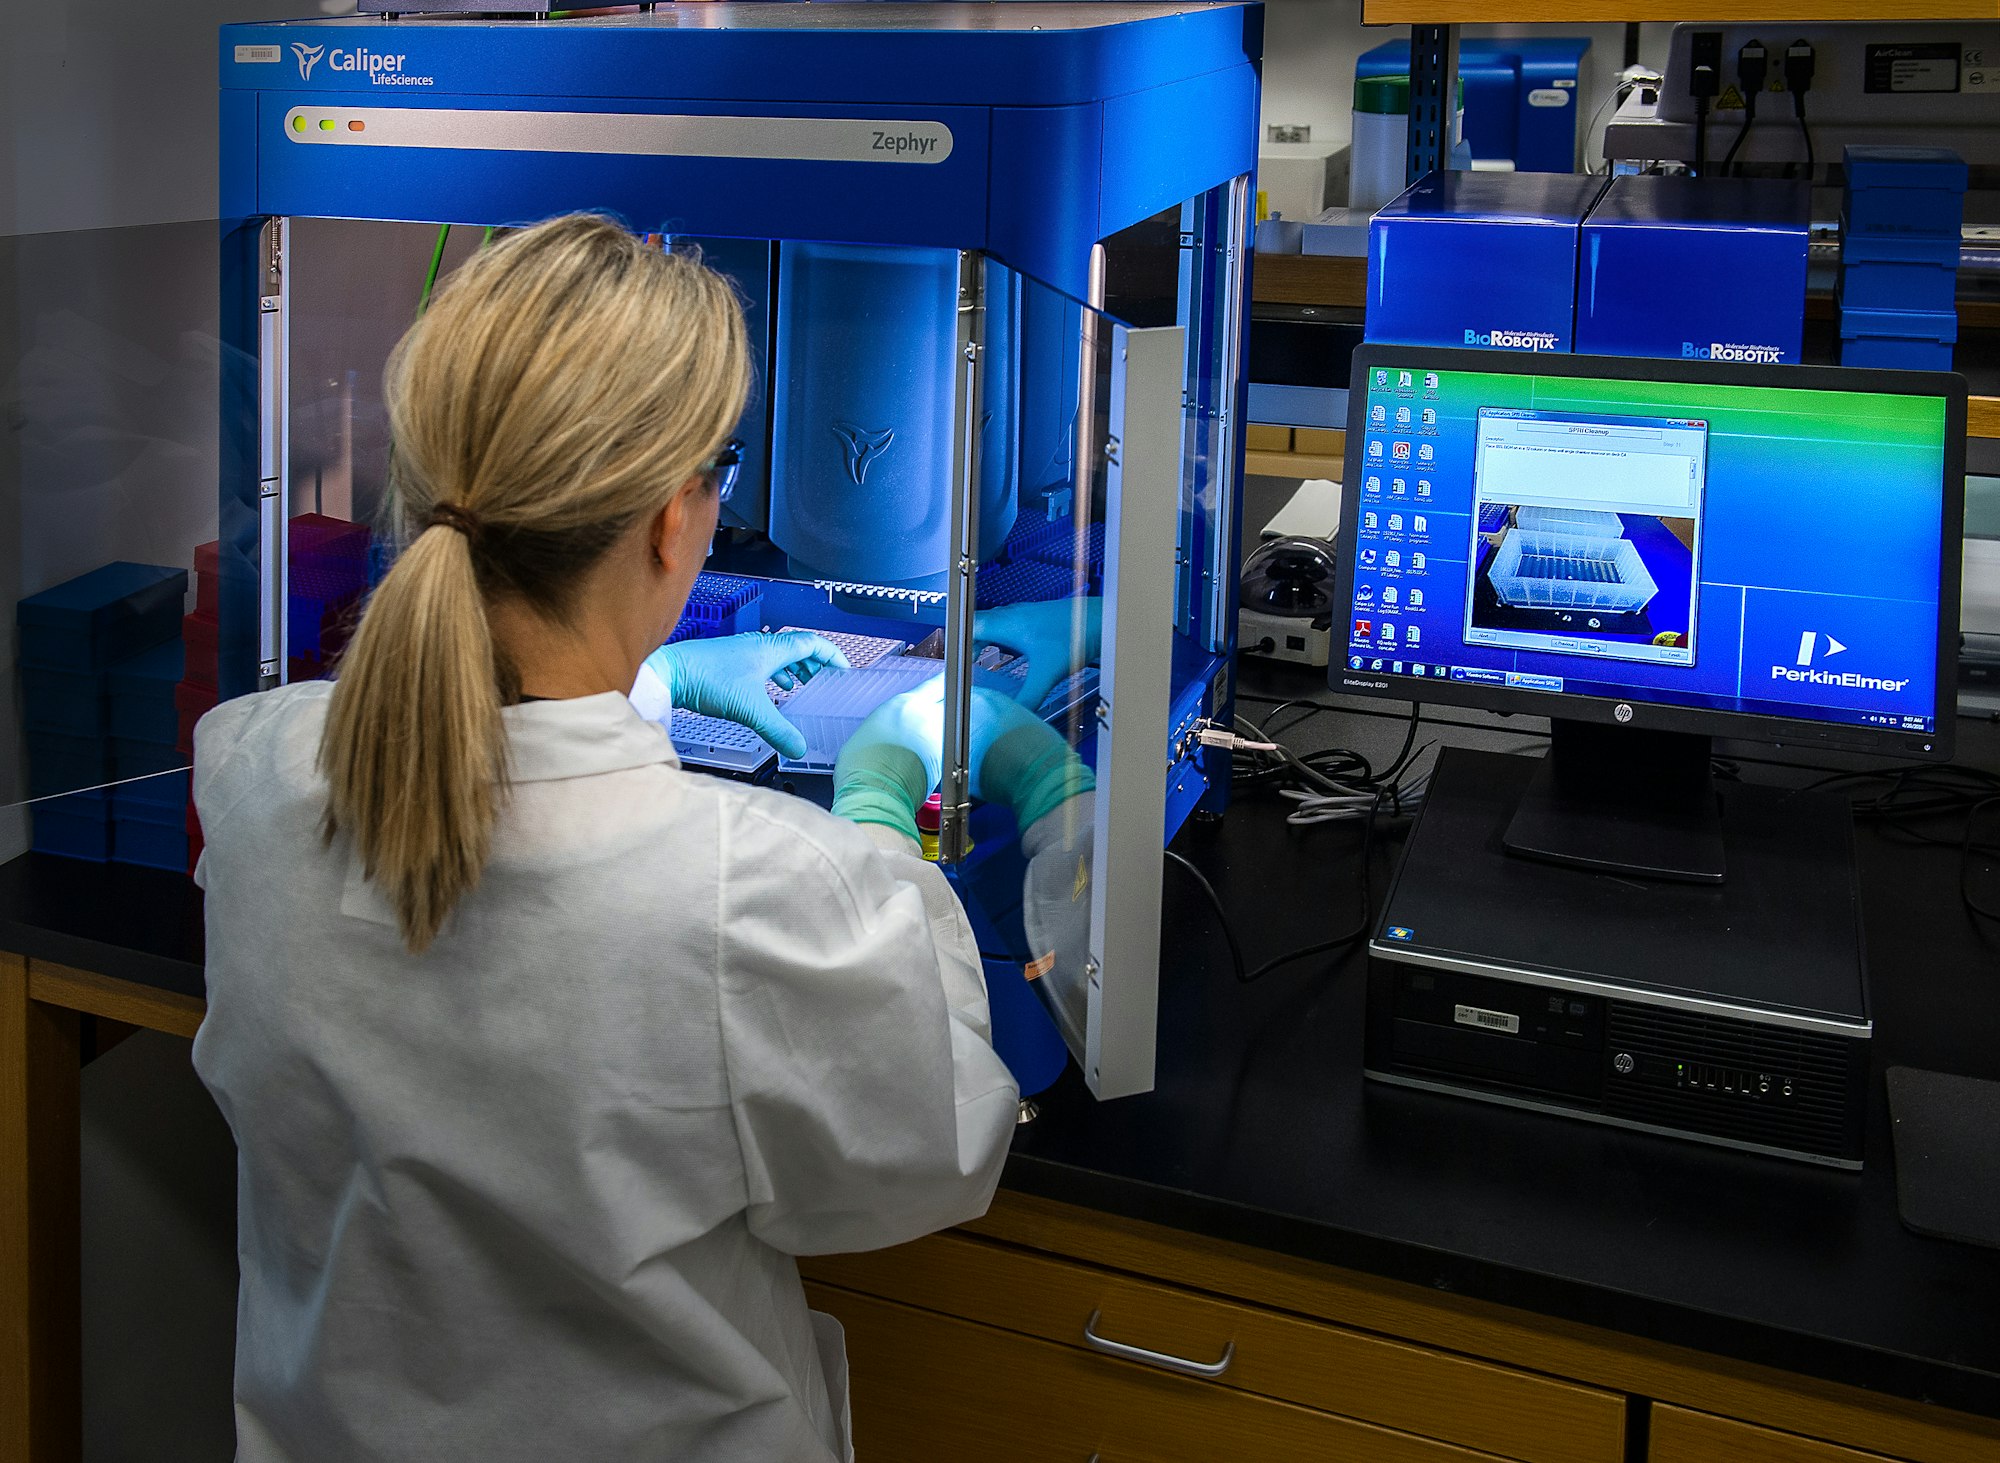 This image depicted a Centers for Disease Control and Prevention (CDC) scientist interacting with her Caliper LifeSciences’ Zephyr Molecular Biology Workstation, working with samples to be tested using a real-time PCR machine, known as a themocycler (see PHIL 22904), in order to identify the various types of poliovirus contained therein. The data from this analysis is stored in a computer, while the software further analyzes the data before being reviewed by a scientist.